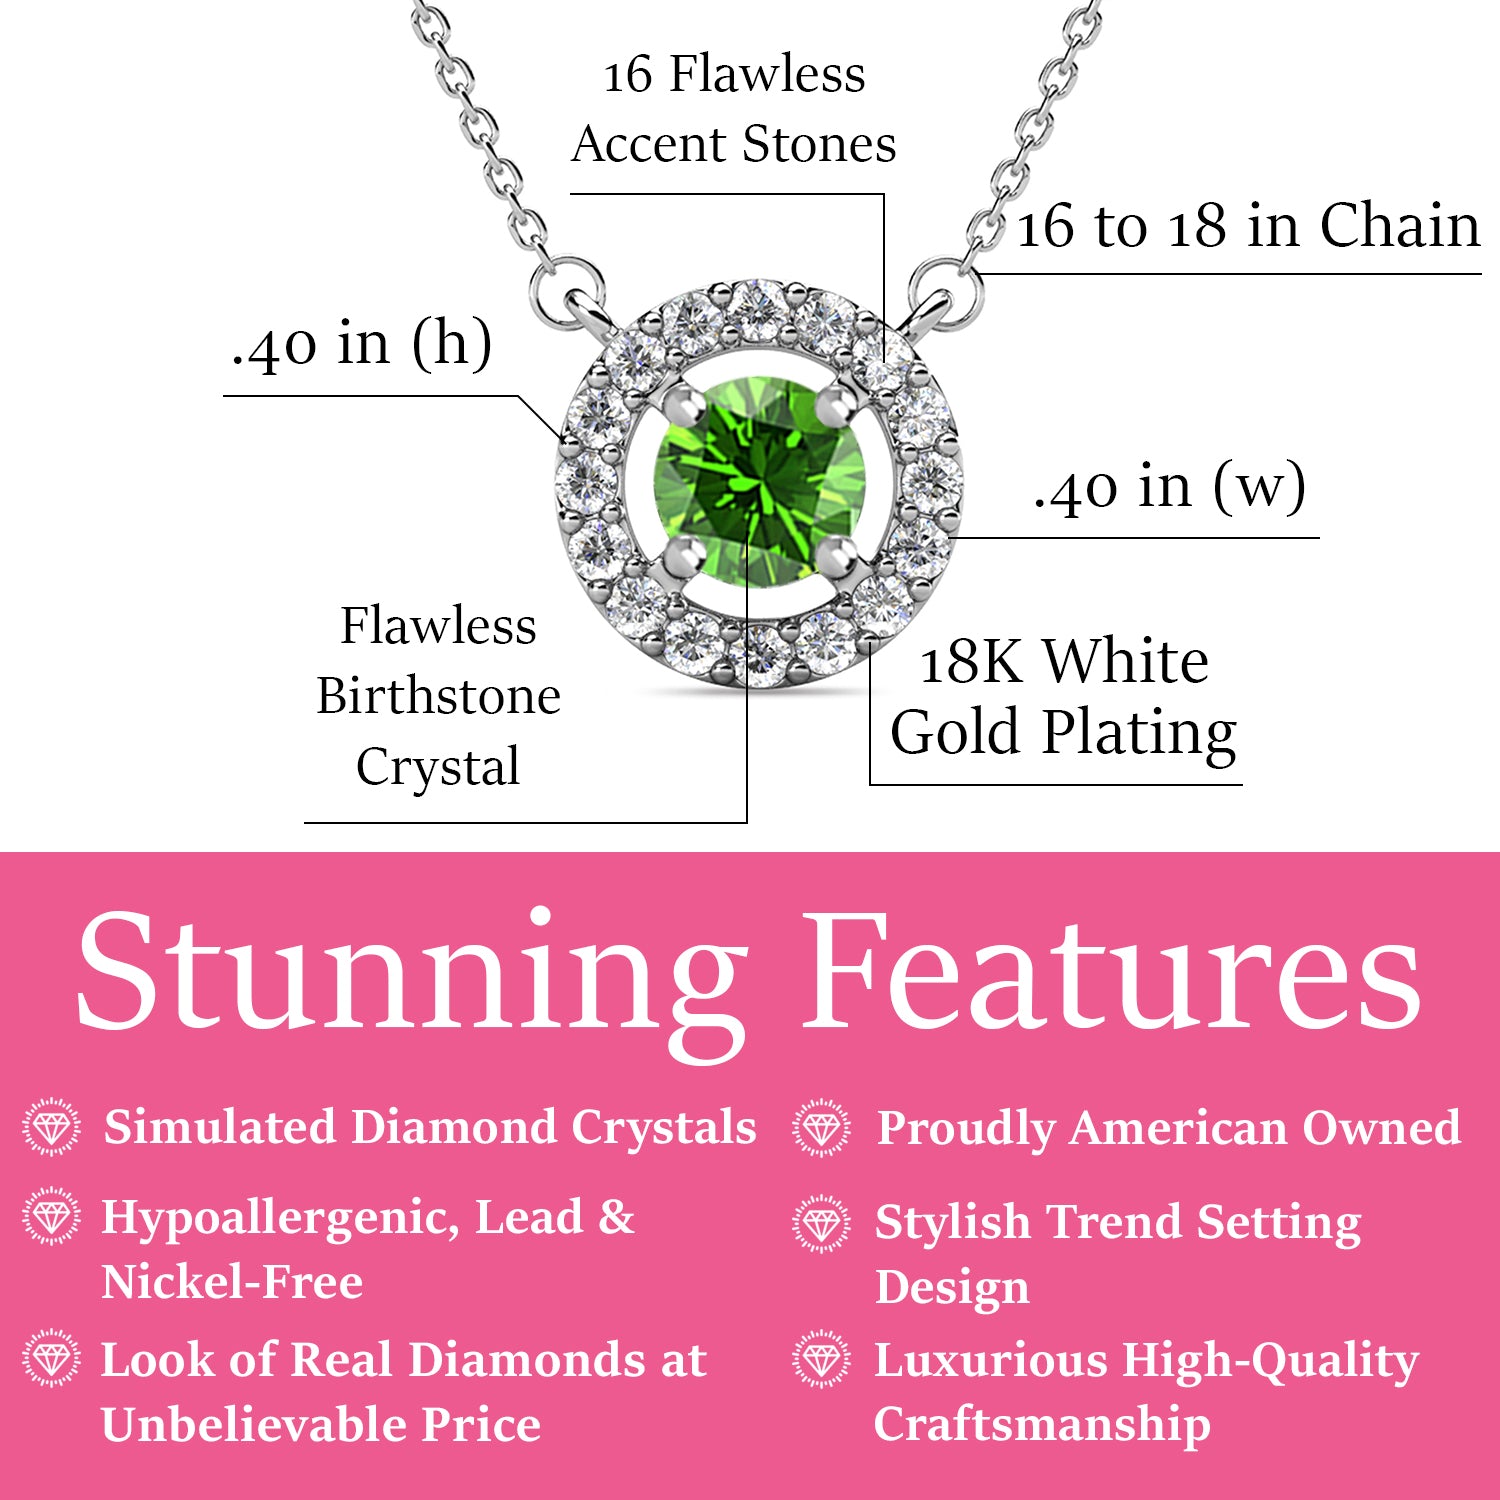 Royal August Birthstone Peridot Necklace, 18k White Gold Plated Silver Halo Necklace with Round Cut Crystal